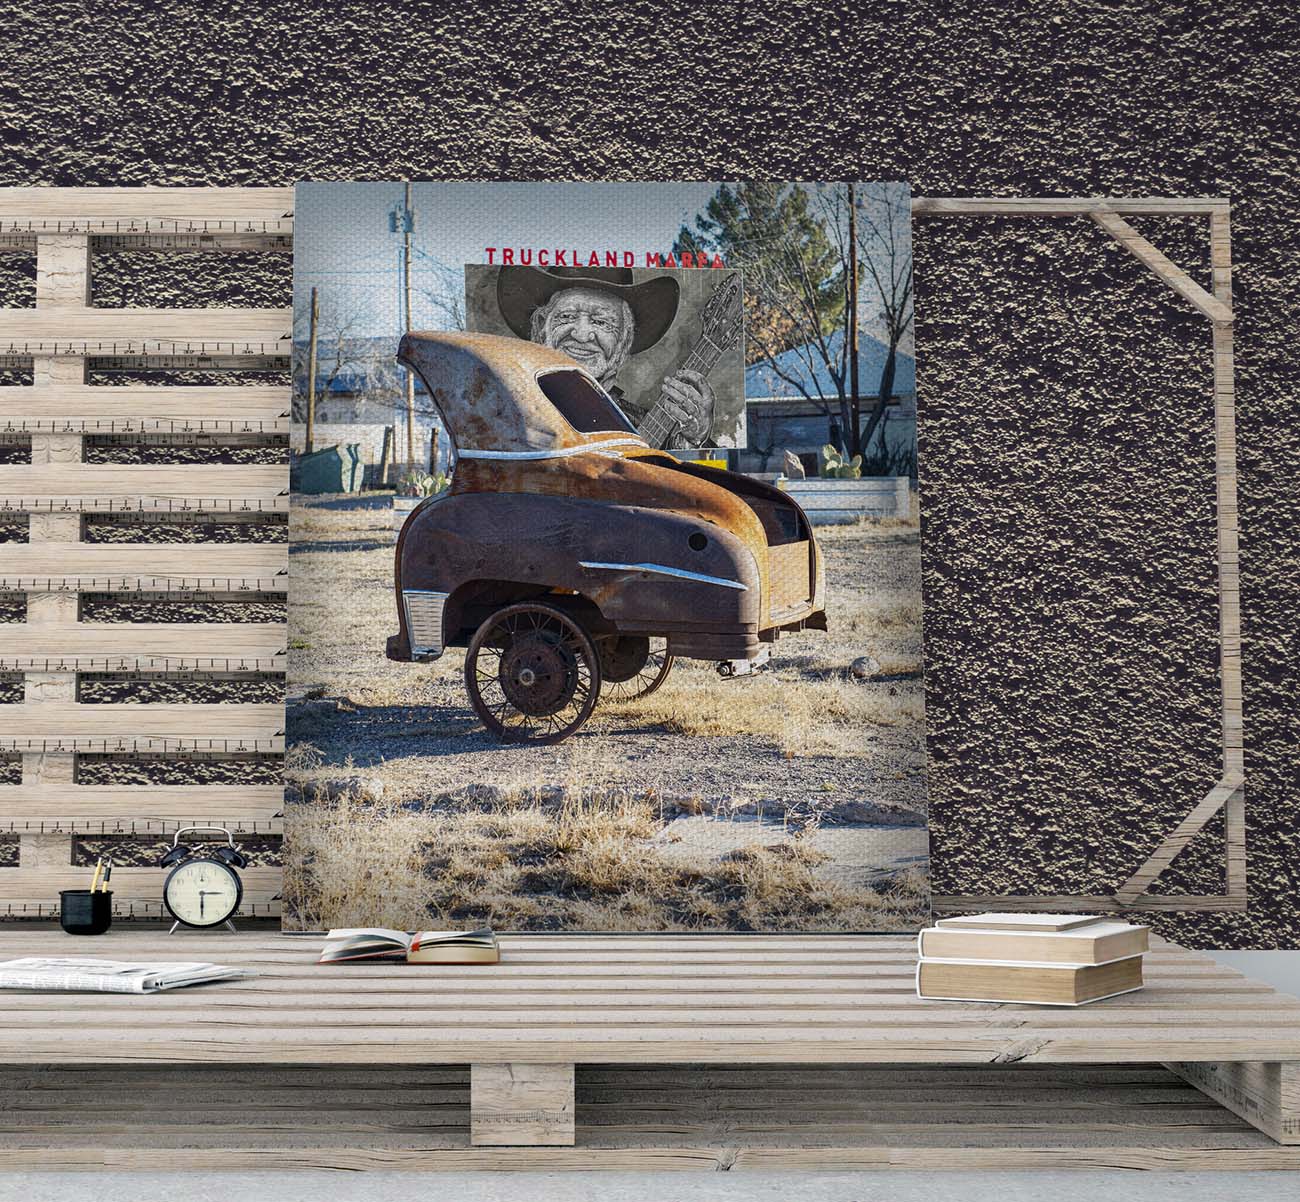 Marfa Truckland photograph by Doug LaRue large print leaning on a pallet